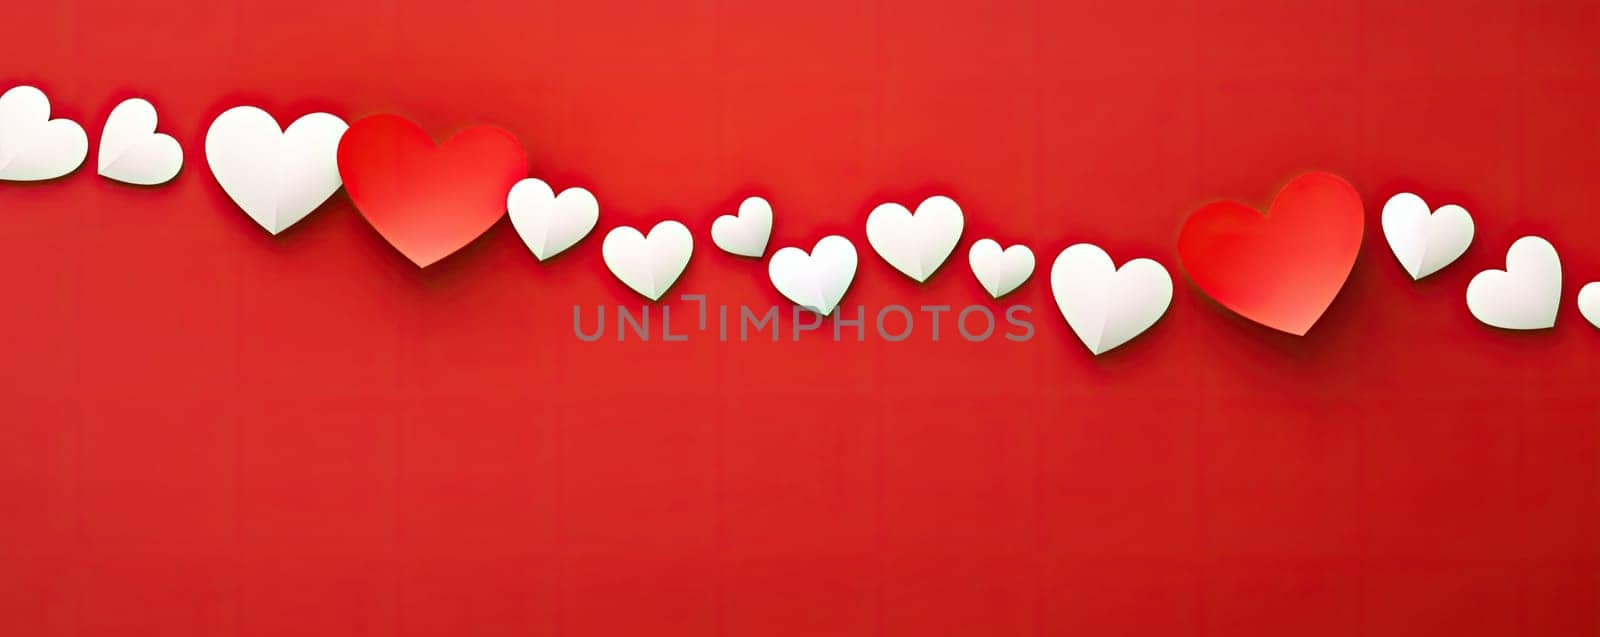 Red and white hearts on a red background by Yurich32